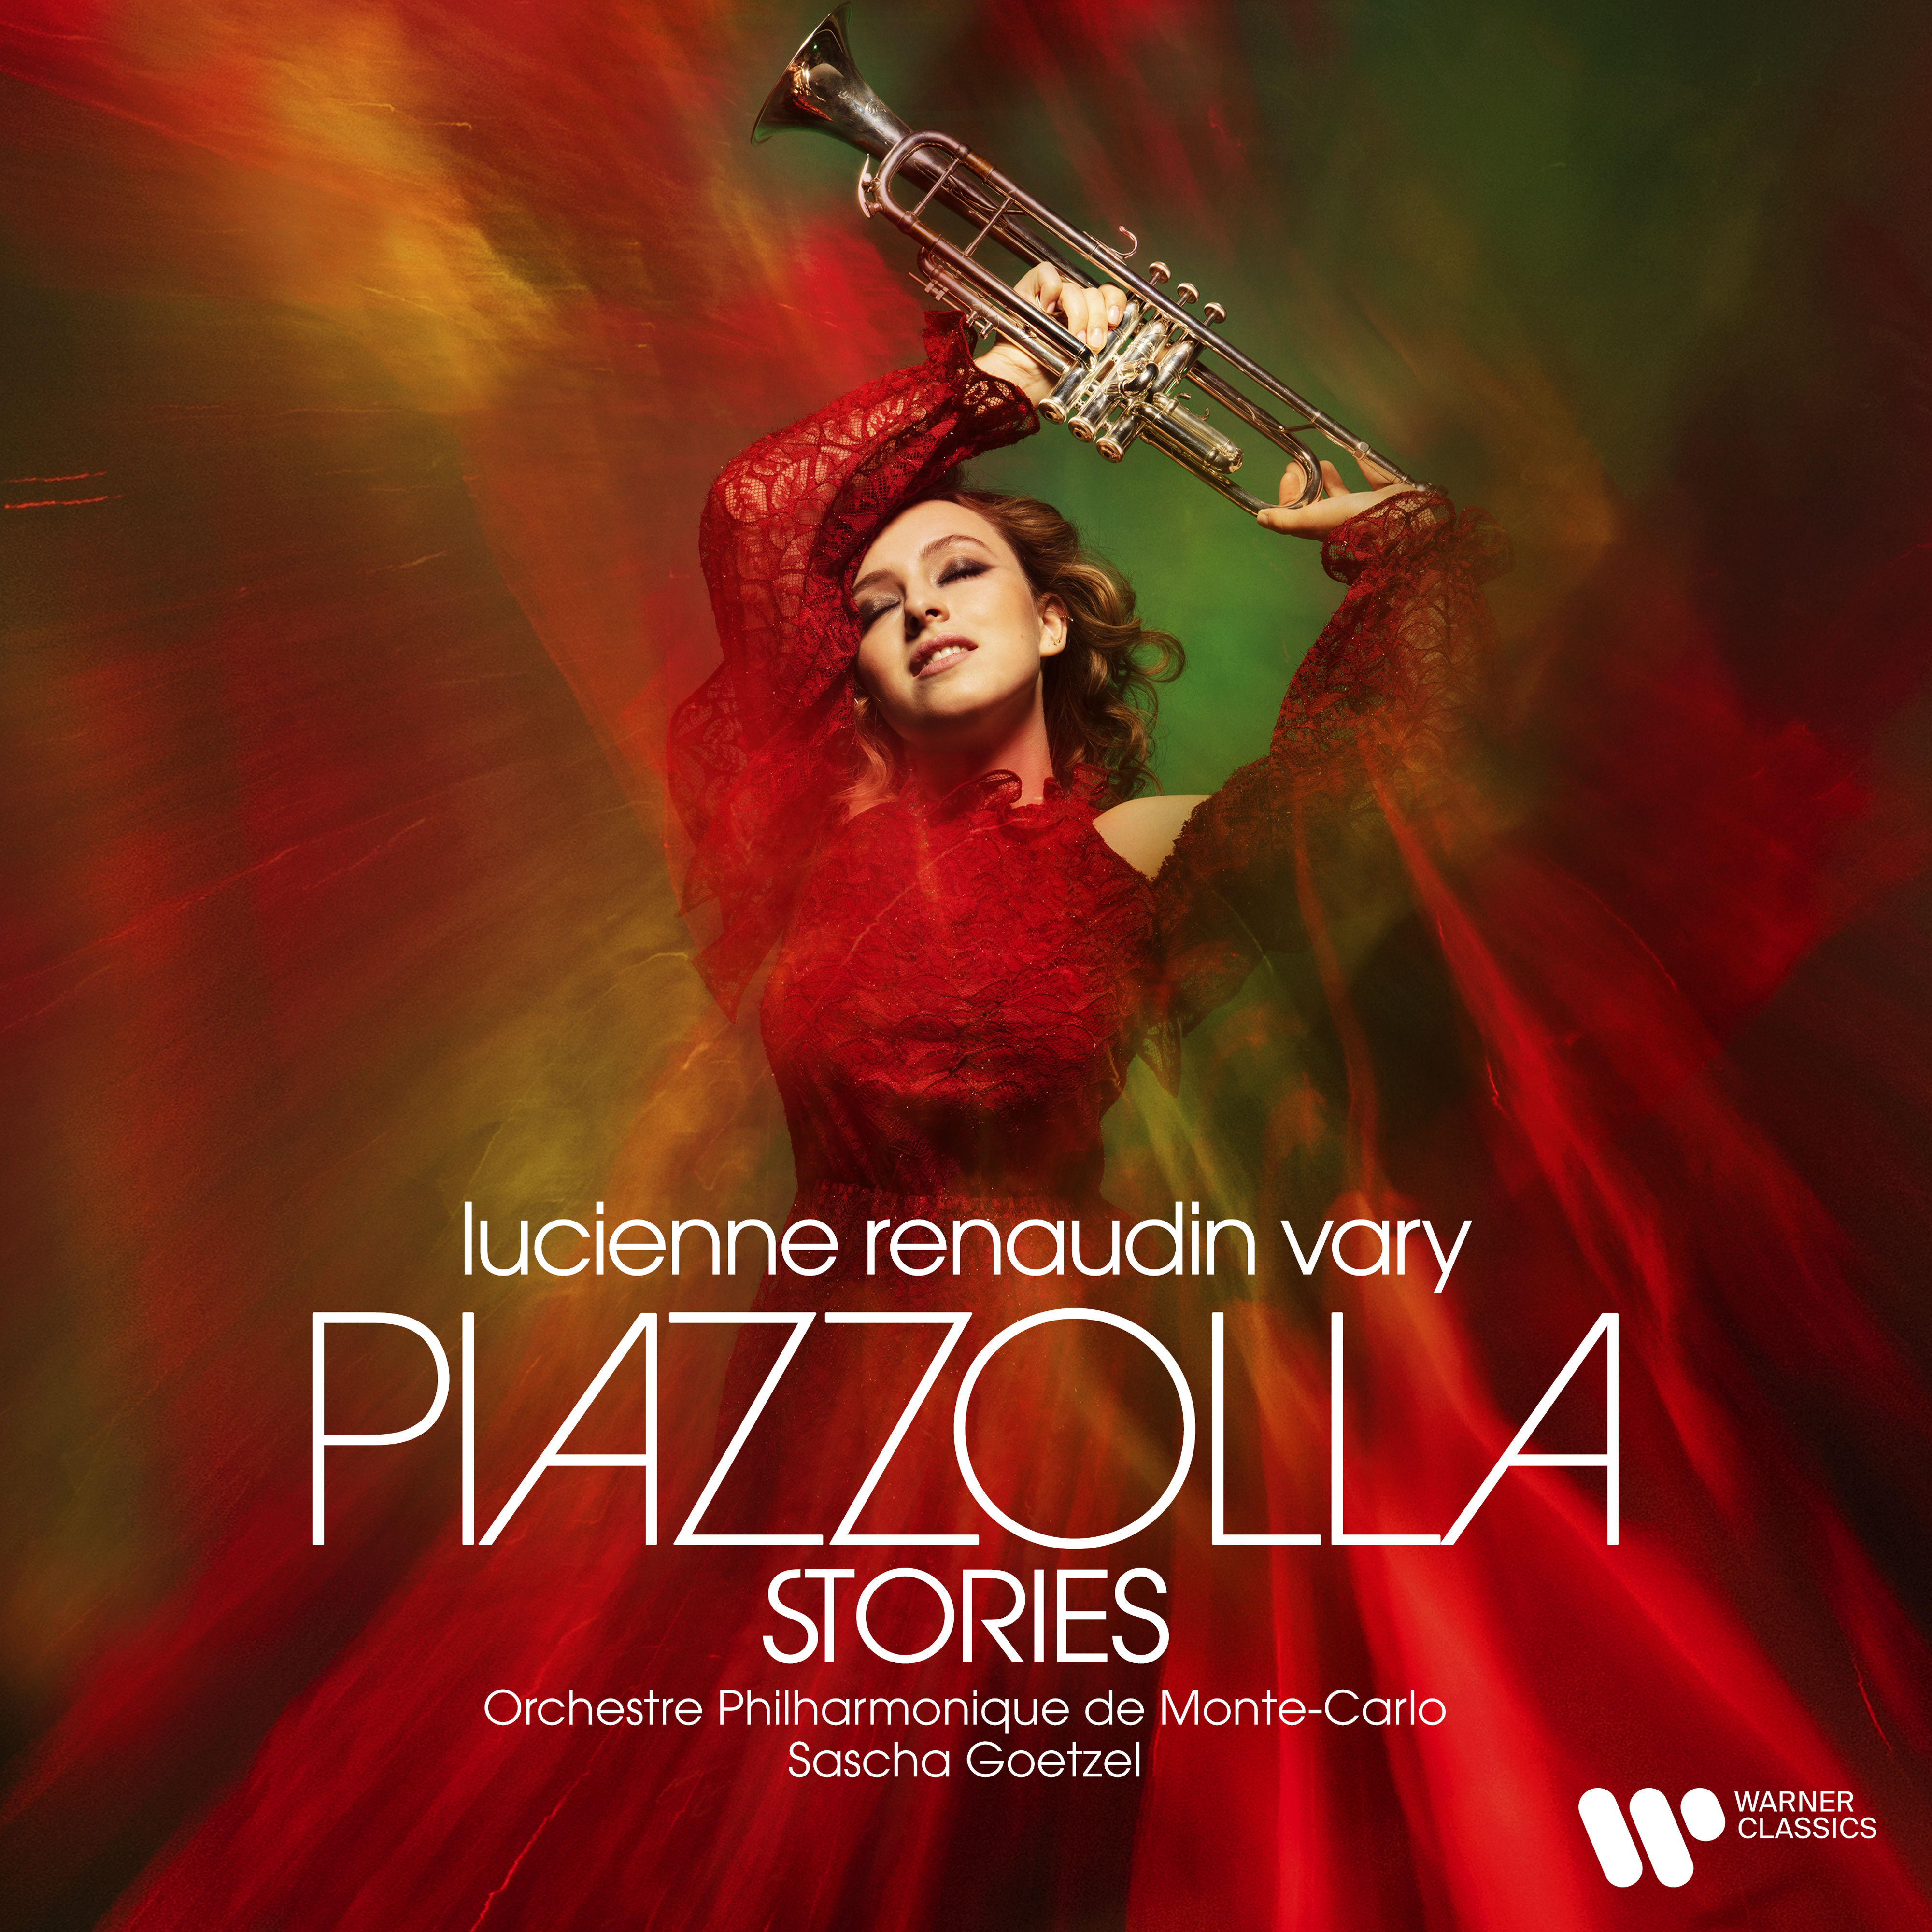 Lucienne Renaudin Vary - Piazzolla Stories (2021) [FLAC 24bit/48kHz]